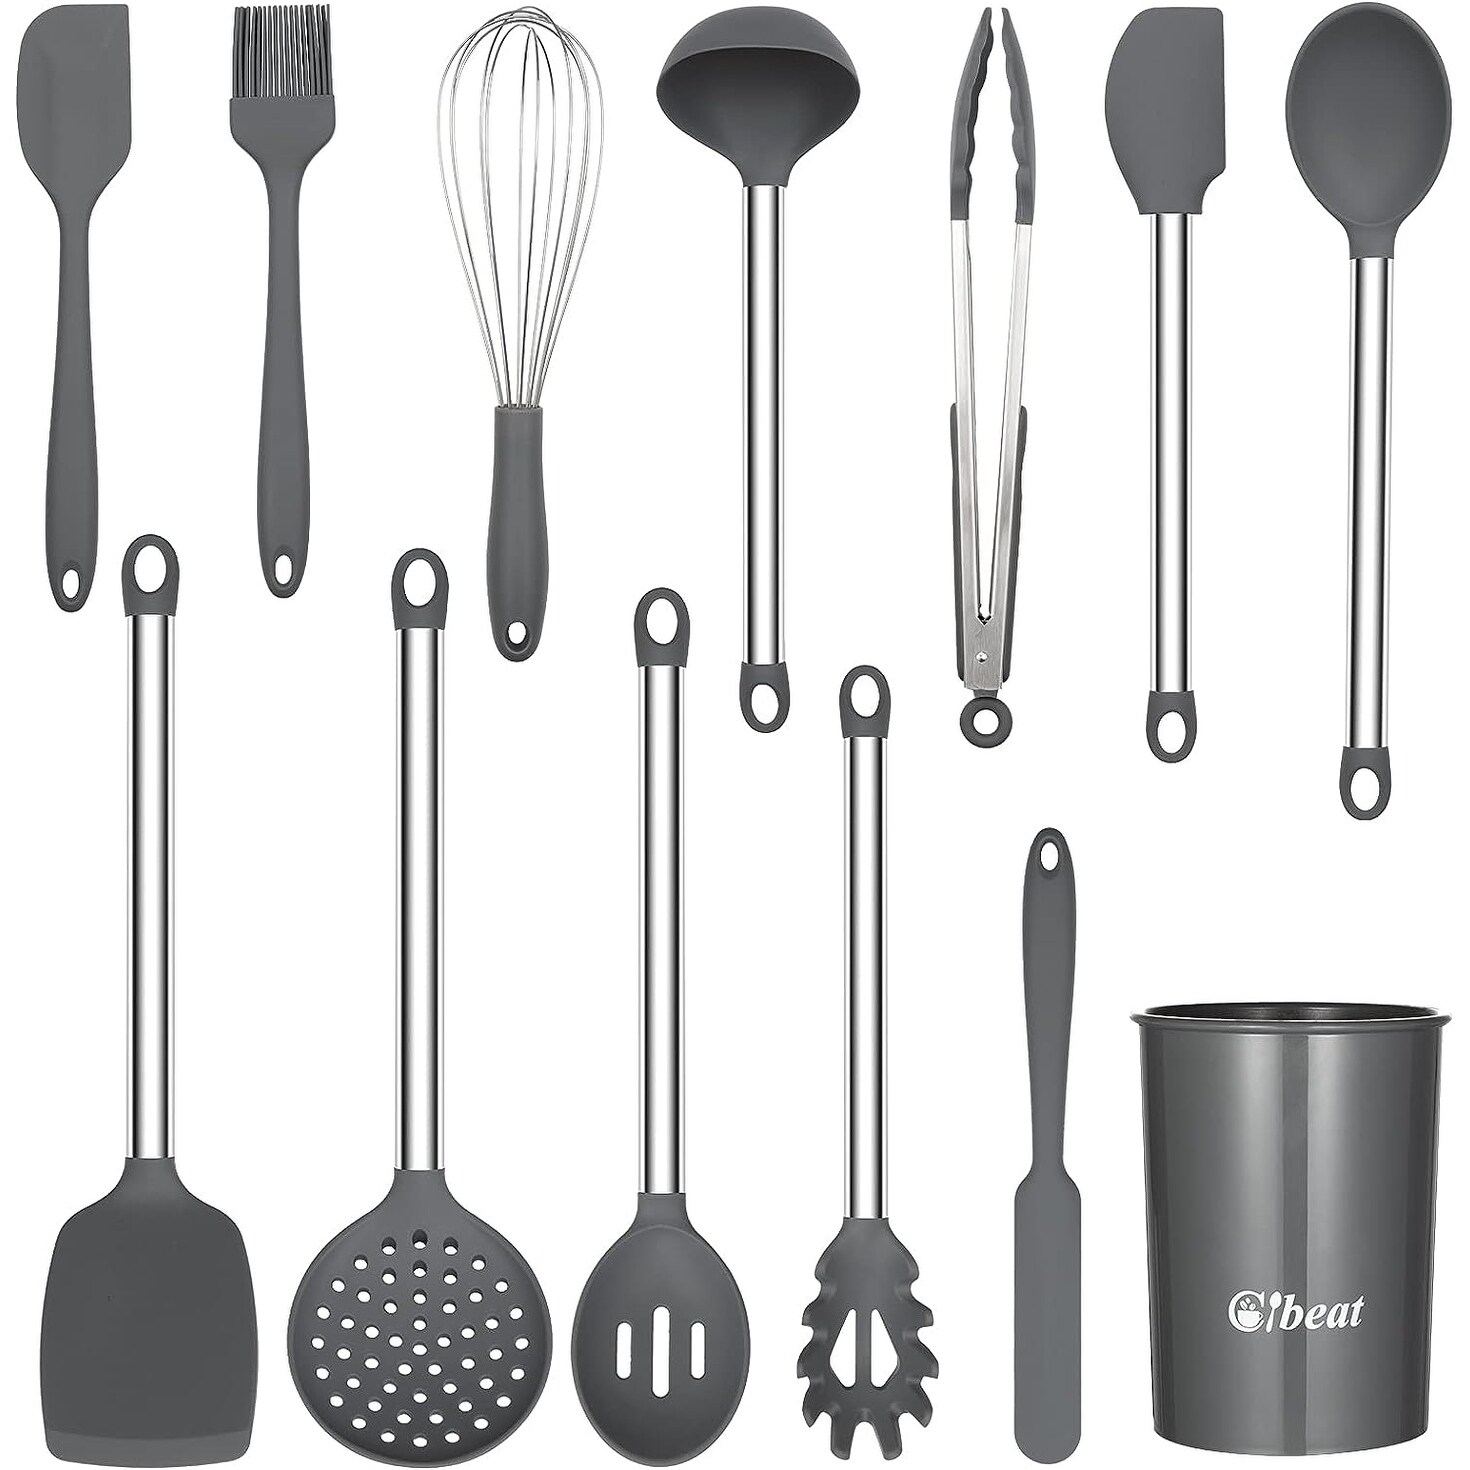 https://ak1.ostkcdn.com/images/products/is/images/direct/9fcd0e9f6aa7289a9131c12e6aae79a39600e876/Kitchen-Utensils-Set-with-Holder%2C-Silicone-Cooking-Utensils-Gadget.jpg